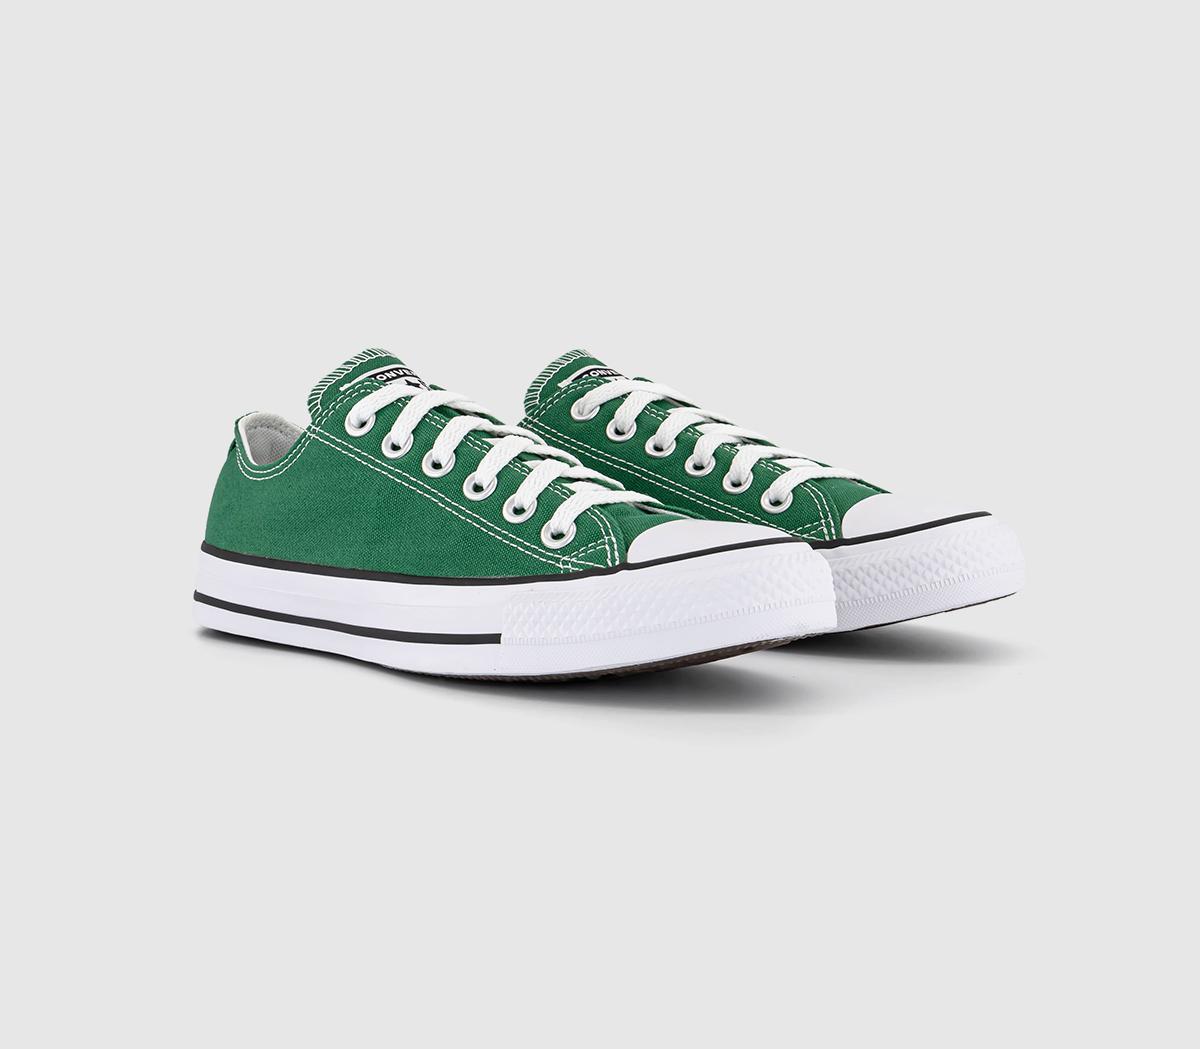 Converse All Star Low Trainers Amazon Green, 9